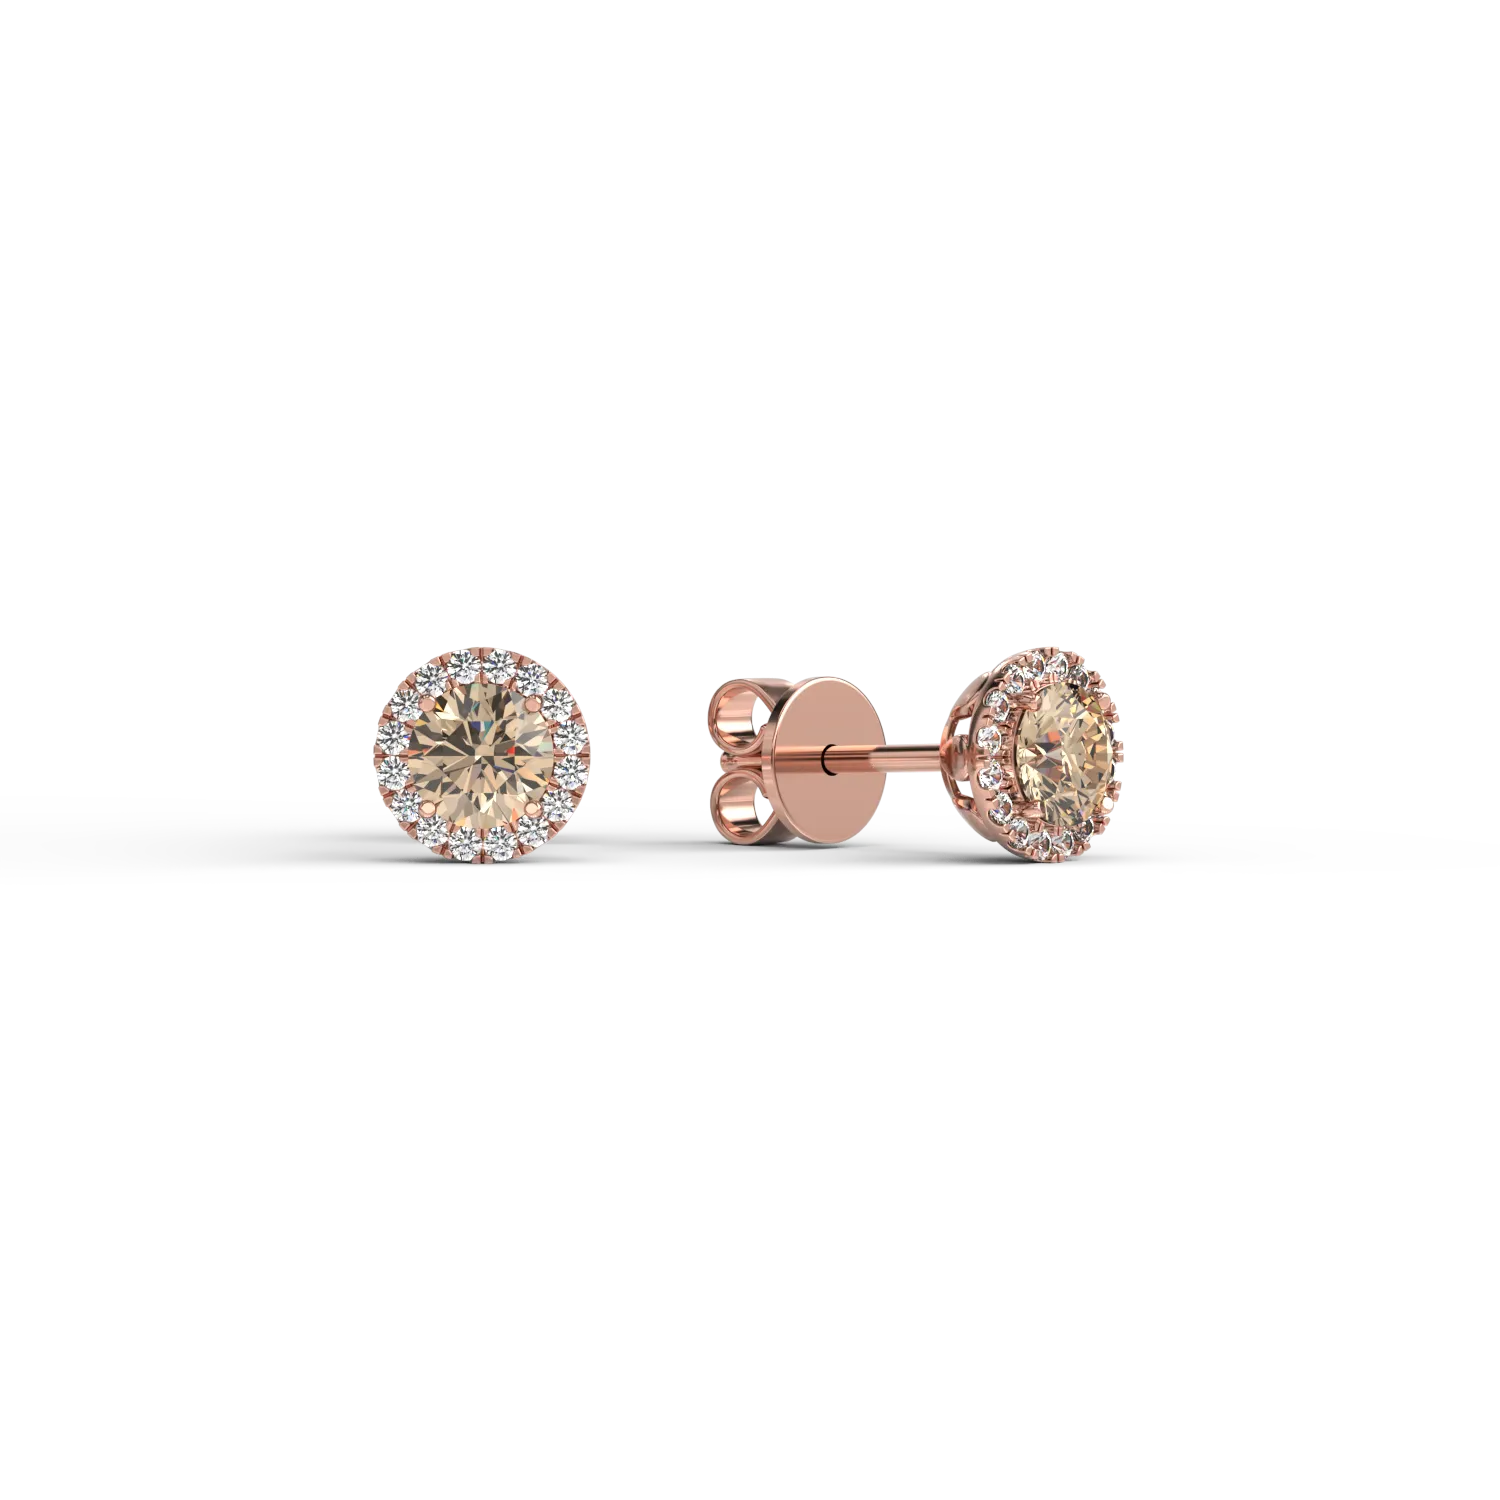 18K rose gold earrings with 1.03ct brown diamonds and 0.16ct clear diamonds